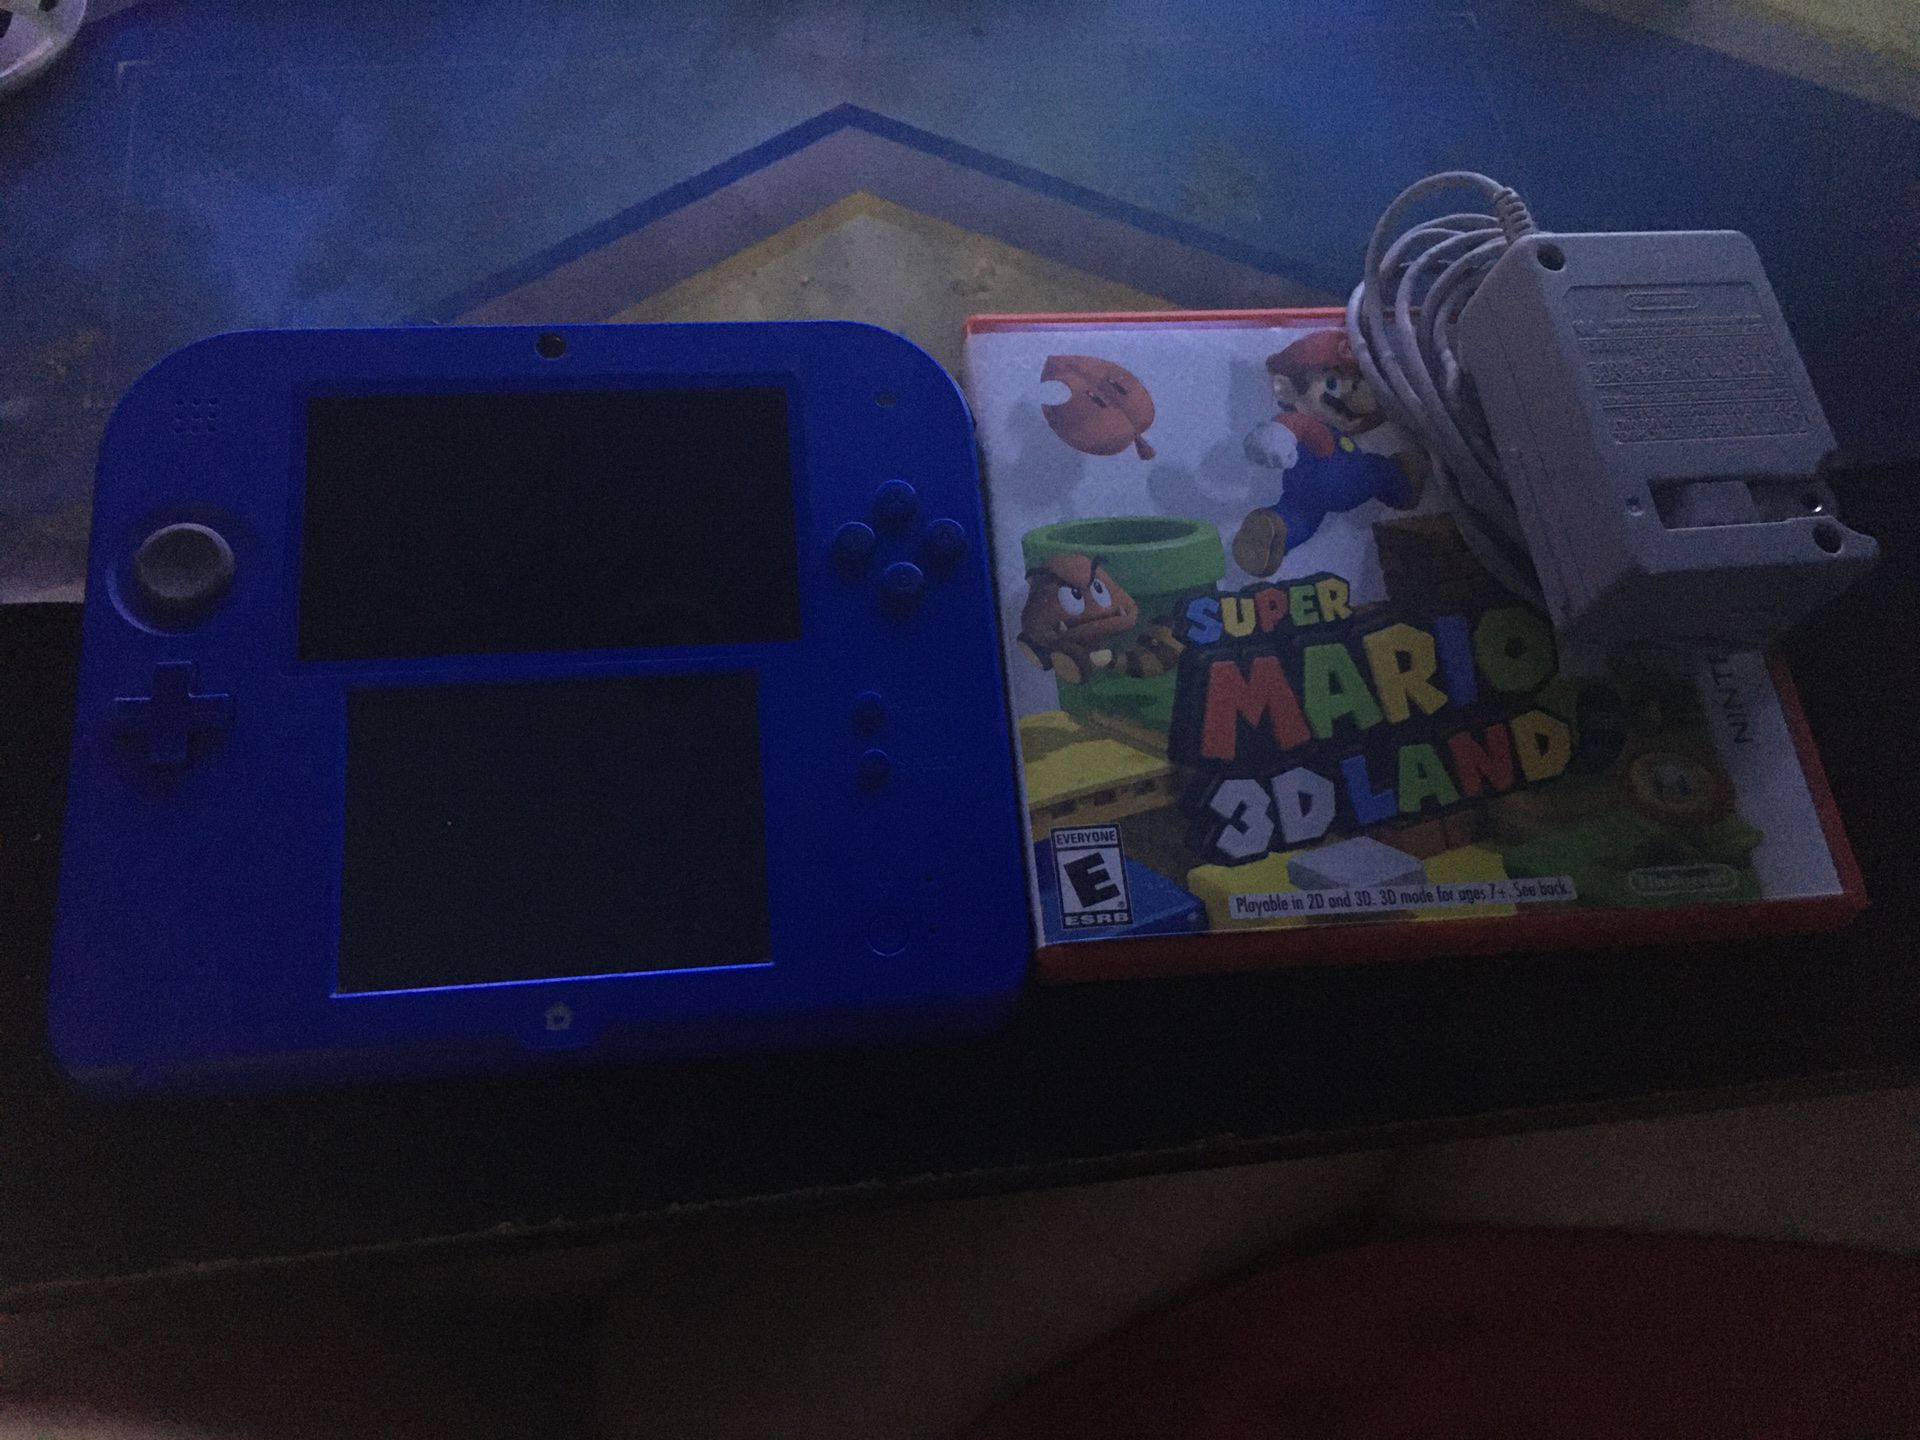 Nintendo 2ds with Mario kart 7 on sd card with Nintendo, also with Super Mario 3D land and charger